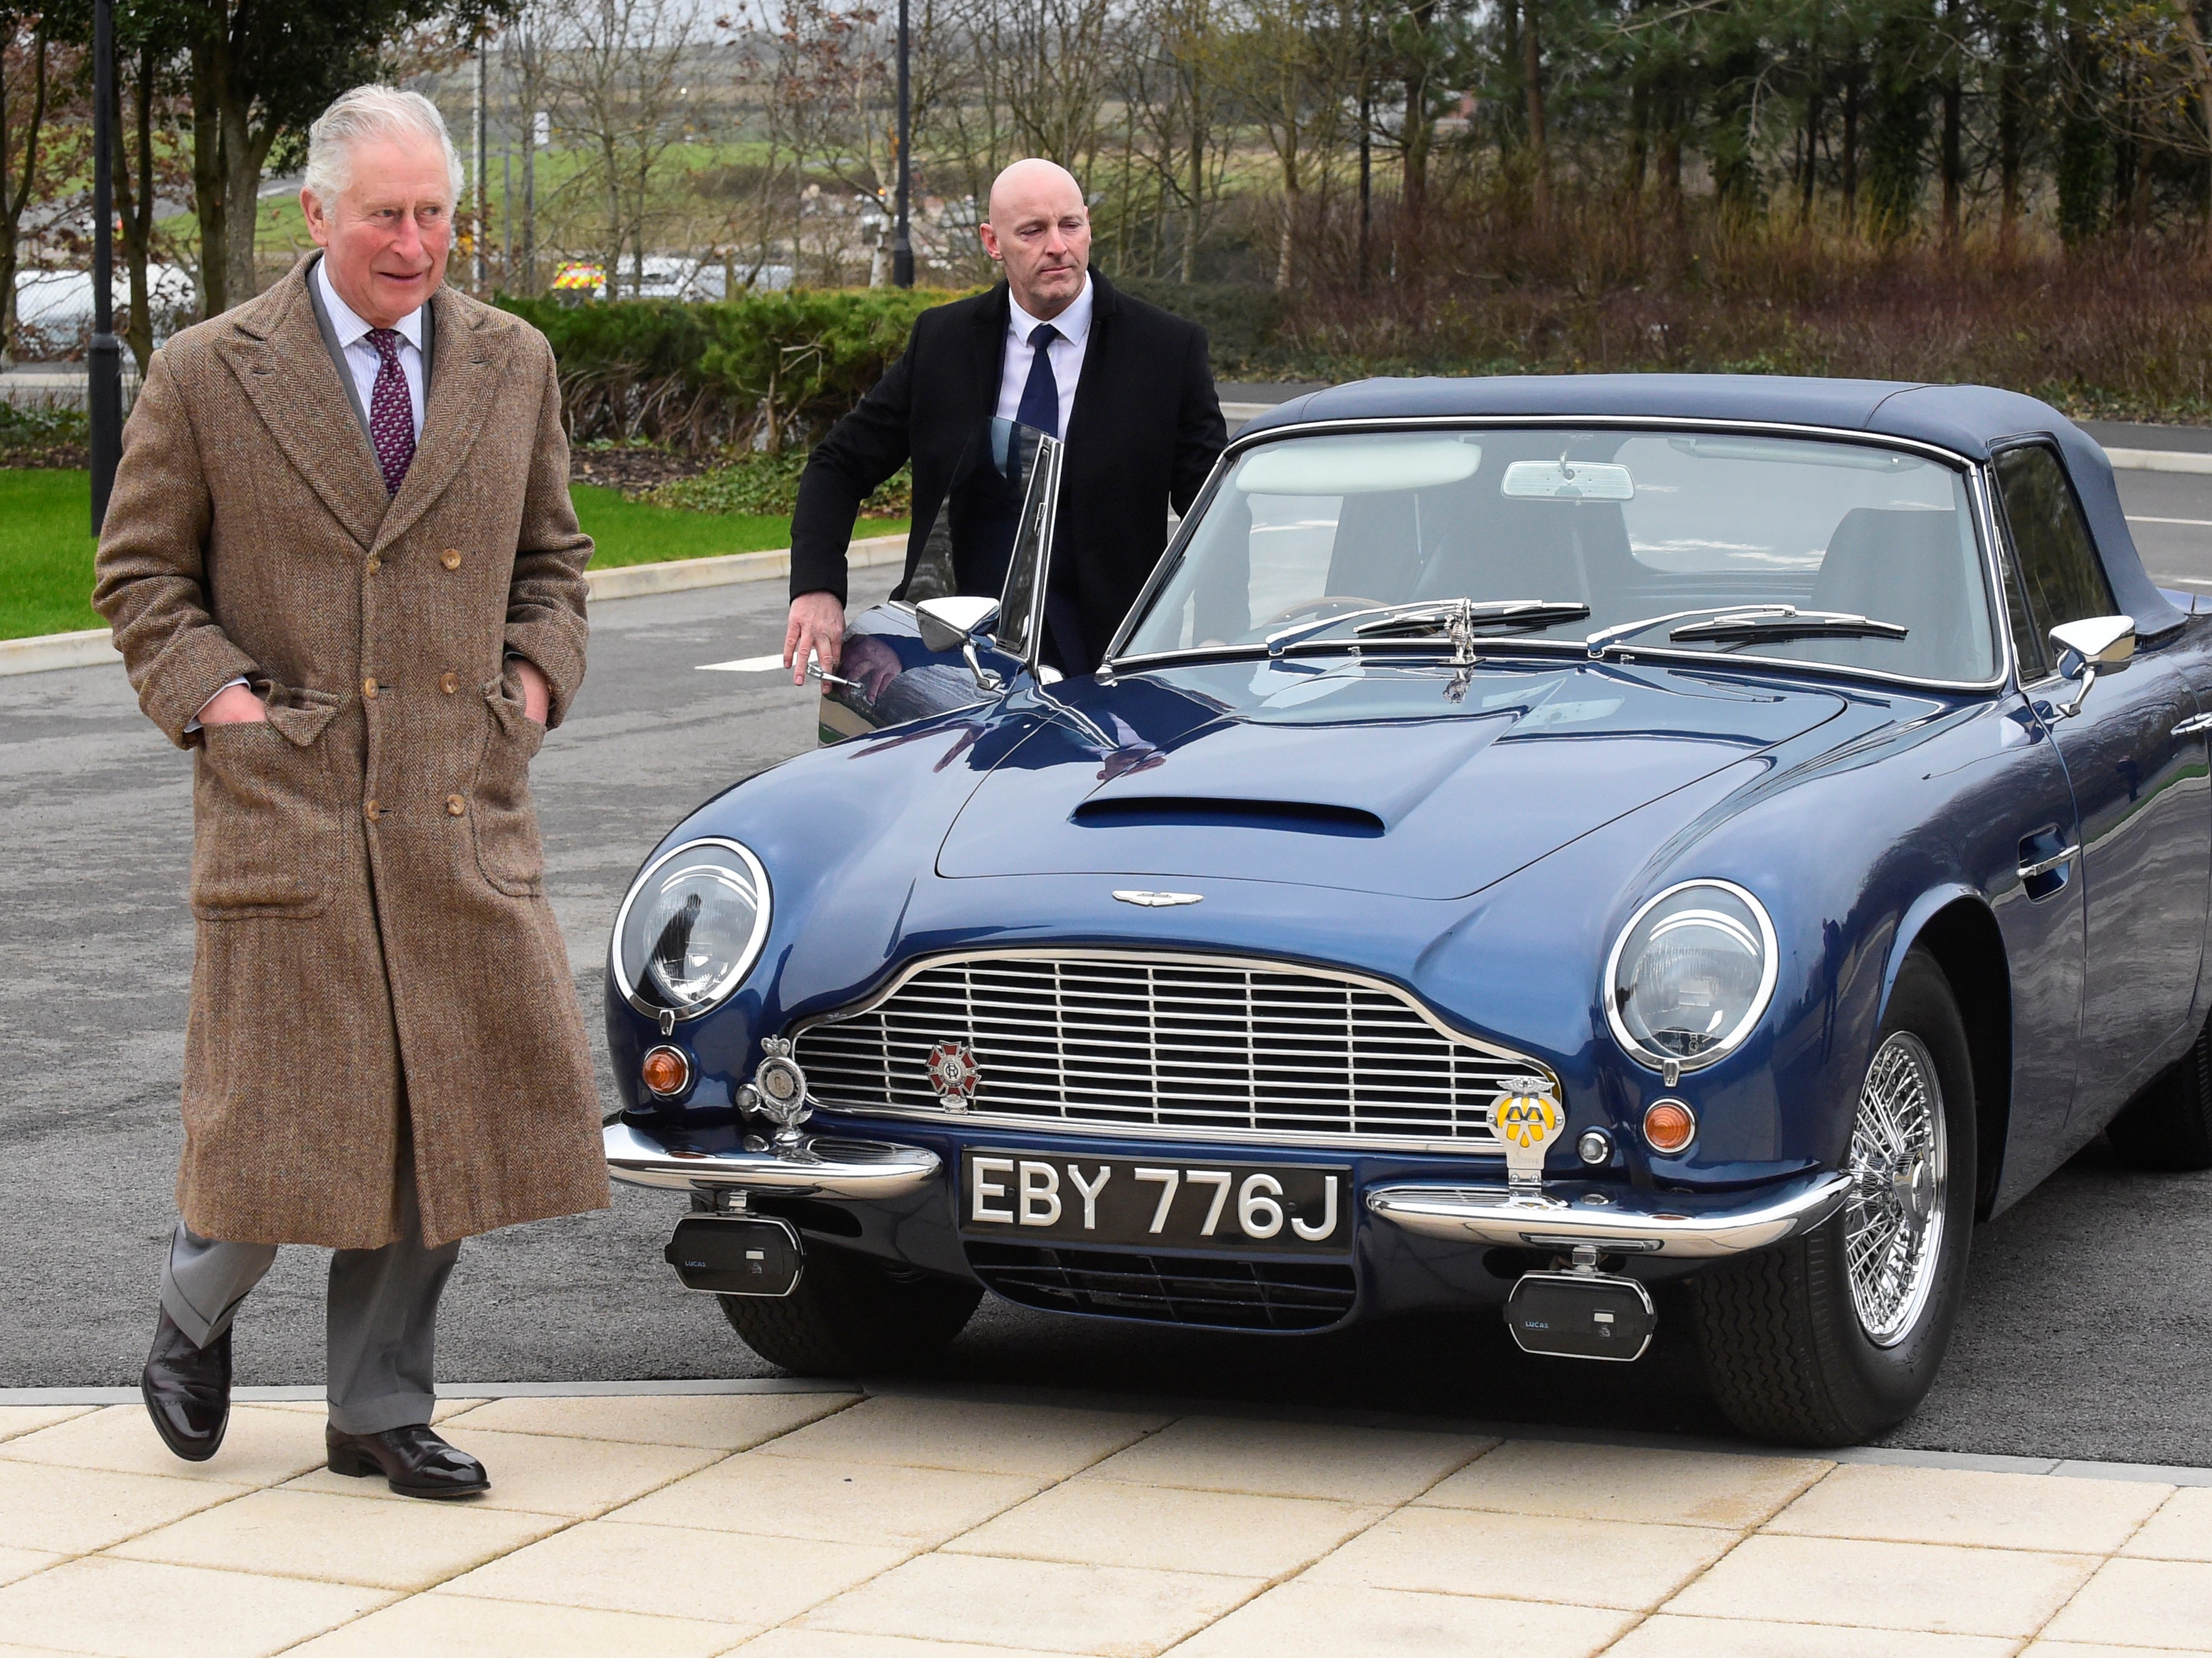 King Charles has said his Aston Martin is powered by cheese and white wine